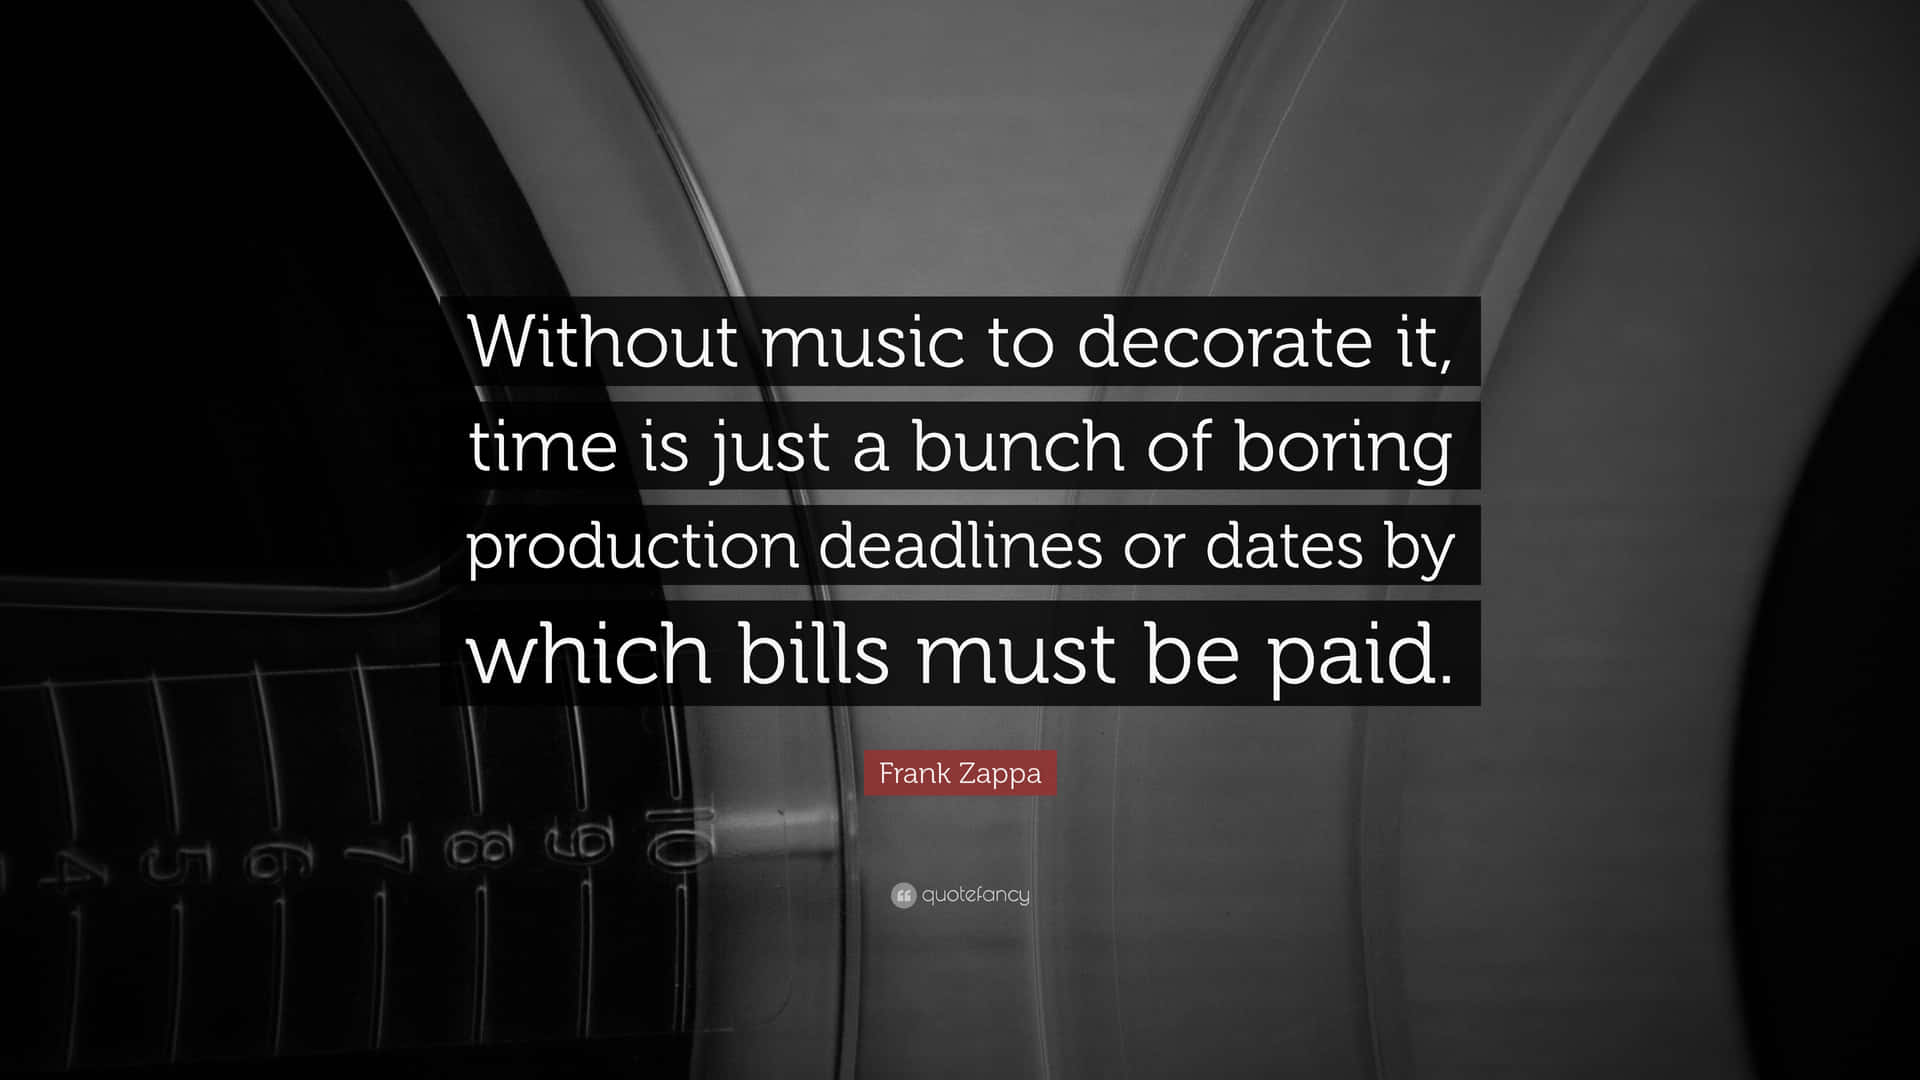 A Quote About Music Without Music To Decorate It Time Is Just A Bunch Of Boring Production